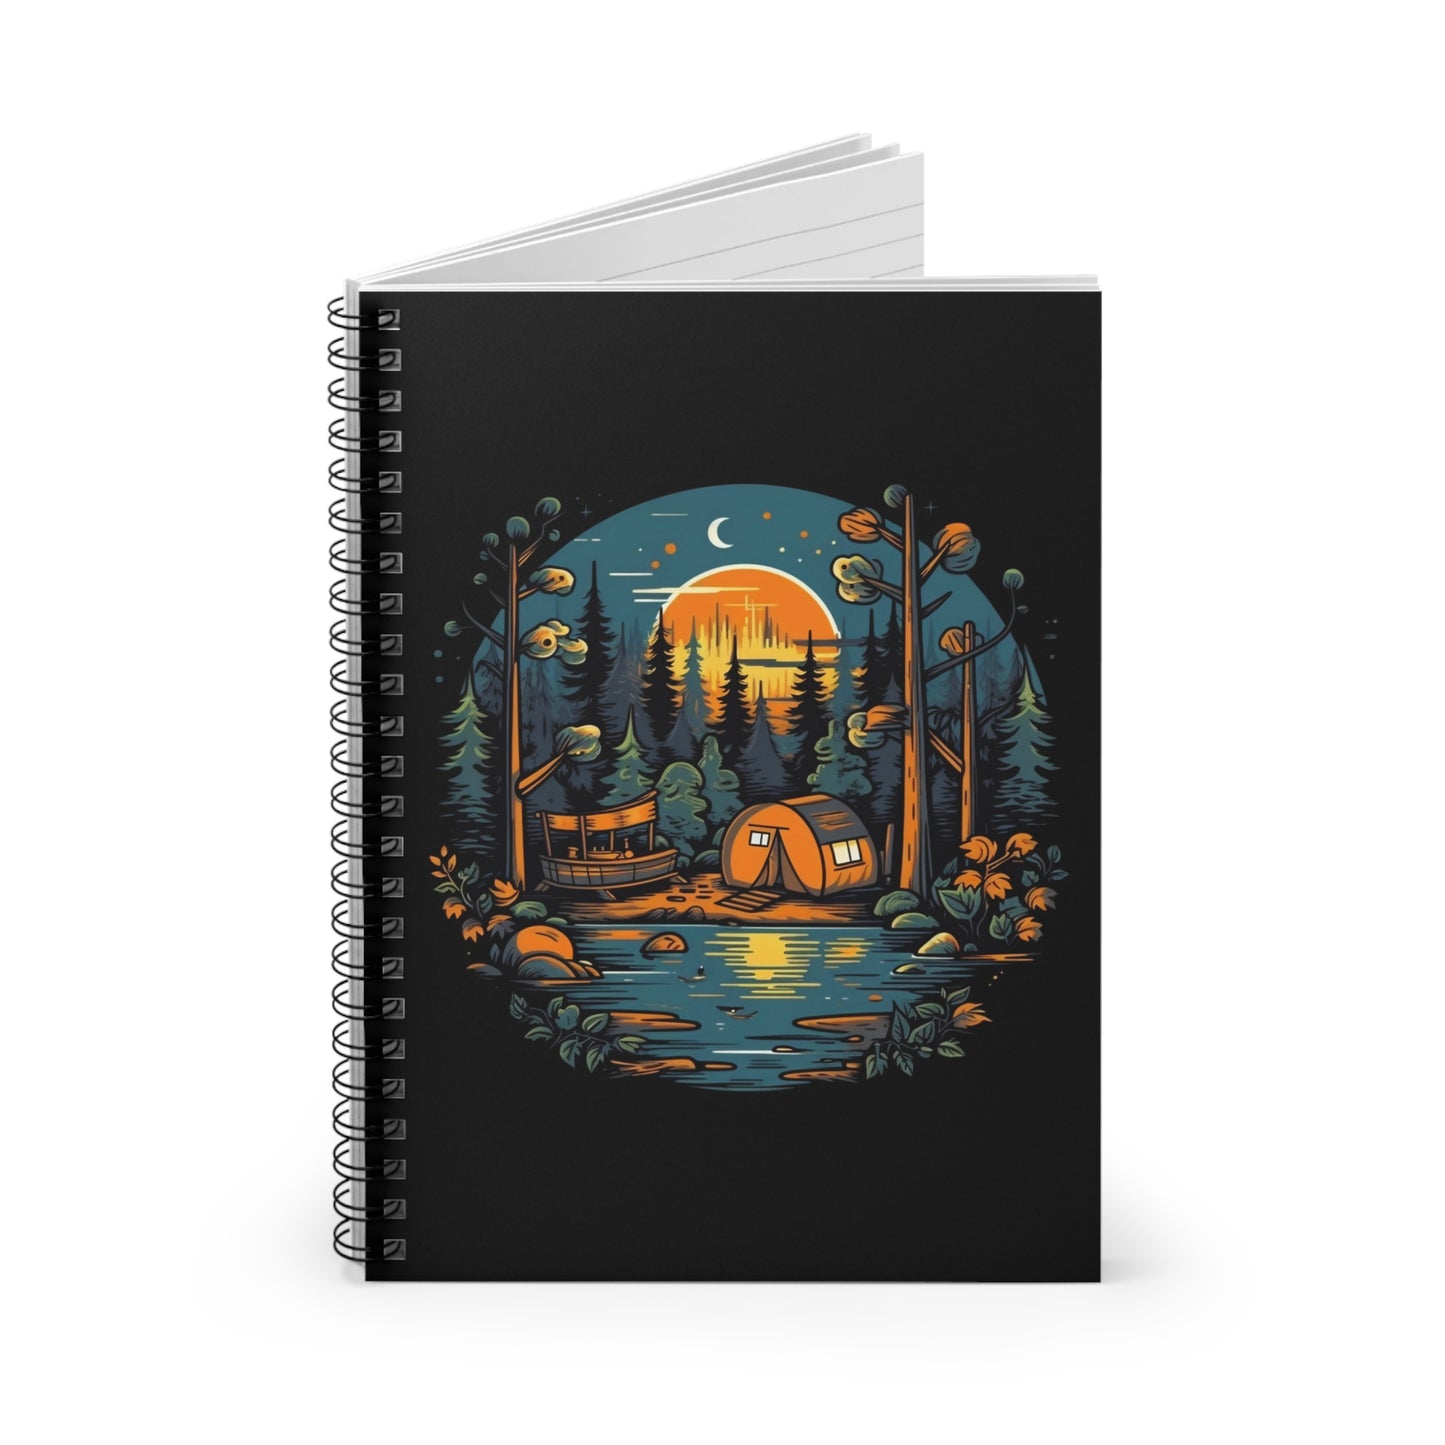 Camping Journal, Sunset Retreat Metal Spiral Notebook, Camping Diary, Adventure Notebook, Travel Journal, Hiking Journal, Diary, Ruled Line